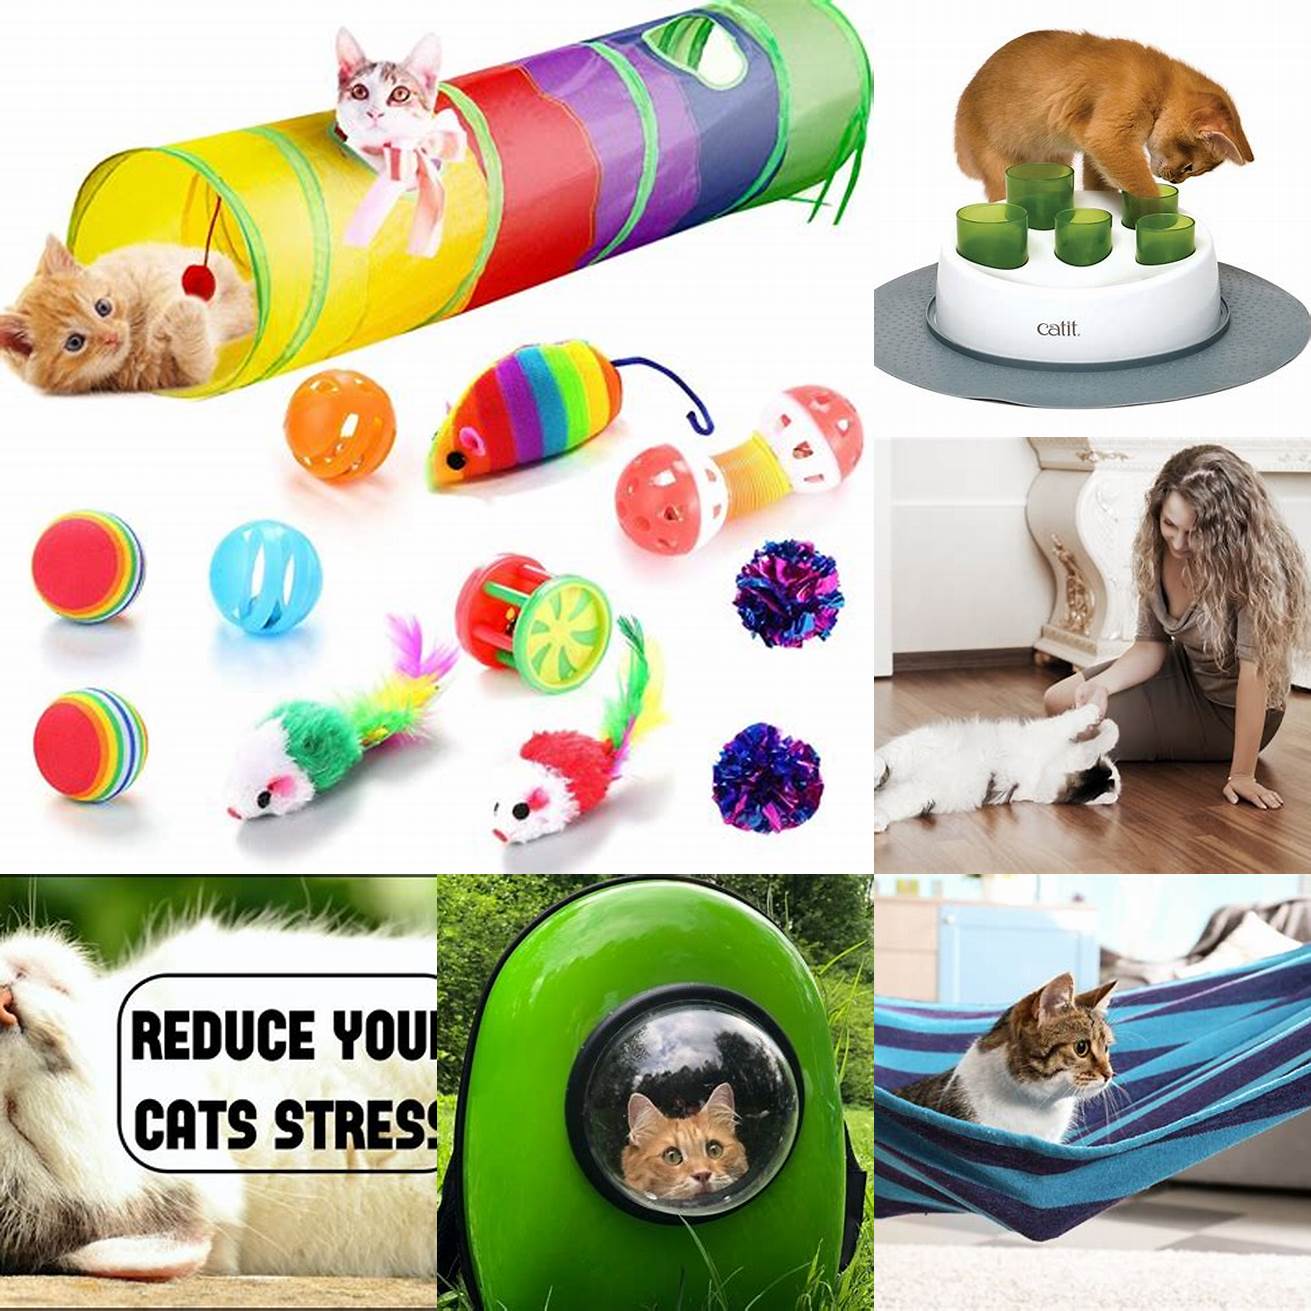 Reduce stress Ensure your cat is in a calm and consistent environment and provide interactive toys and playtime to reduce stress and anxiety